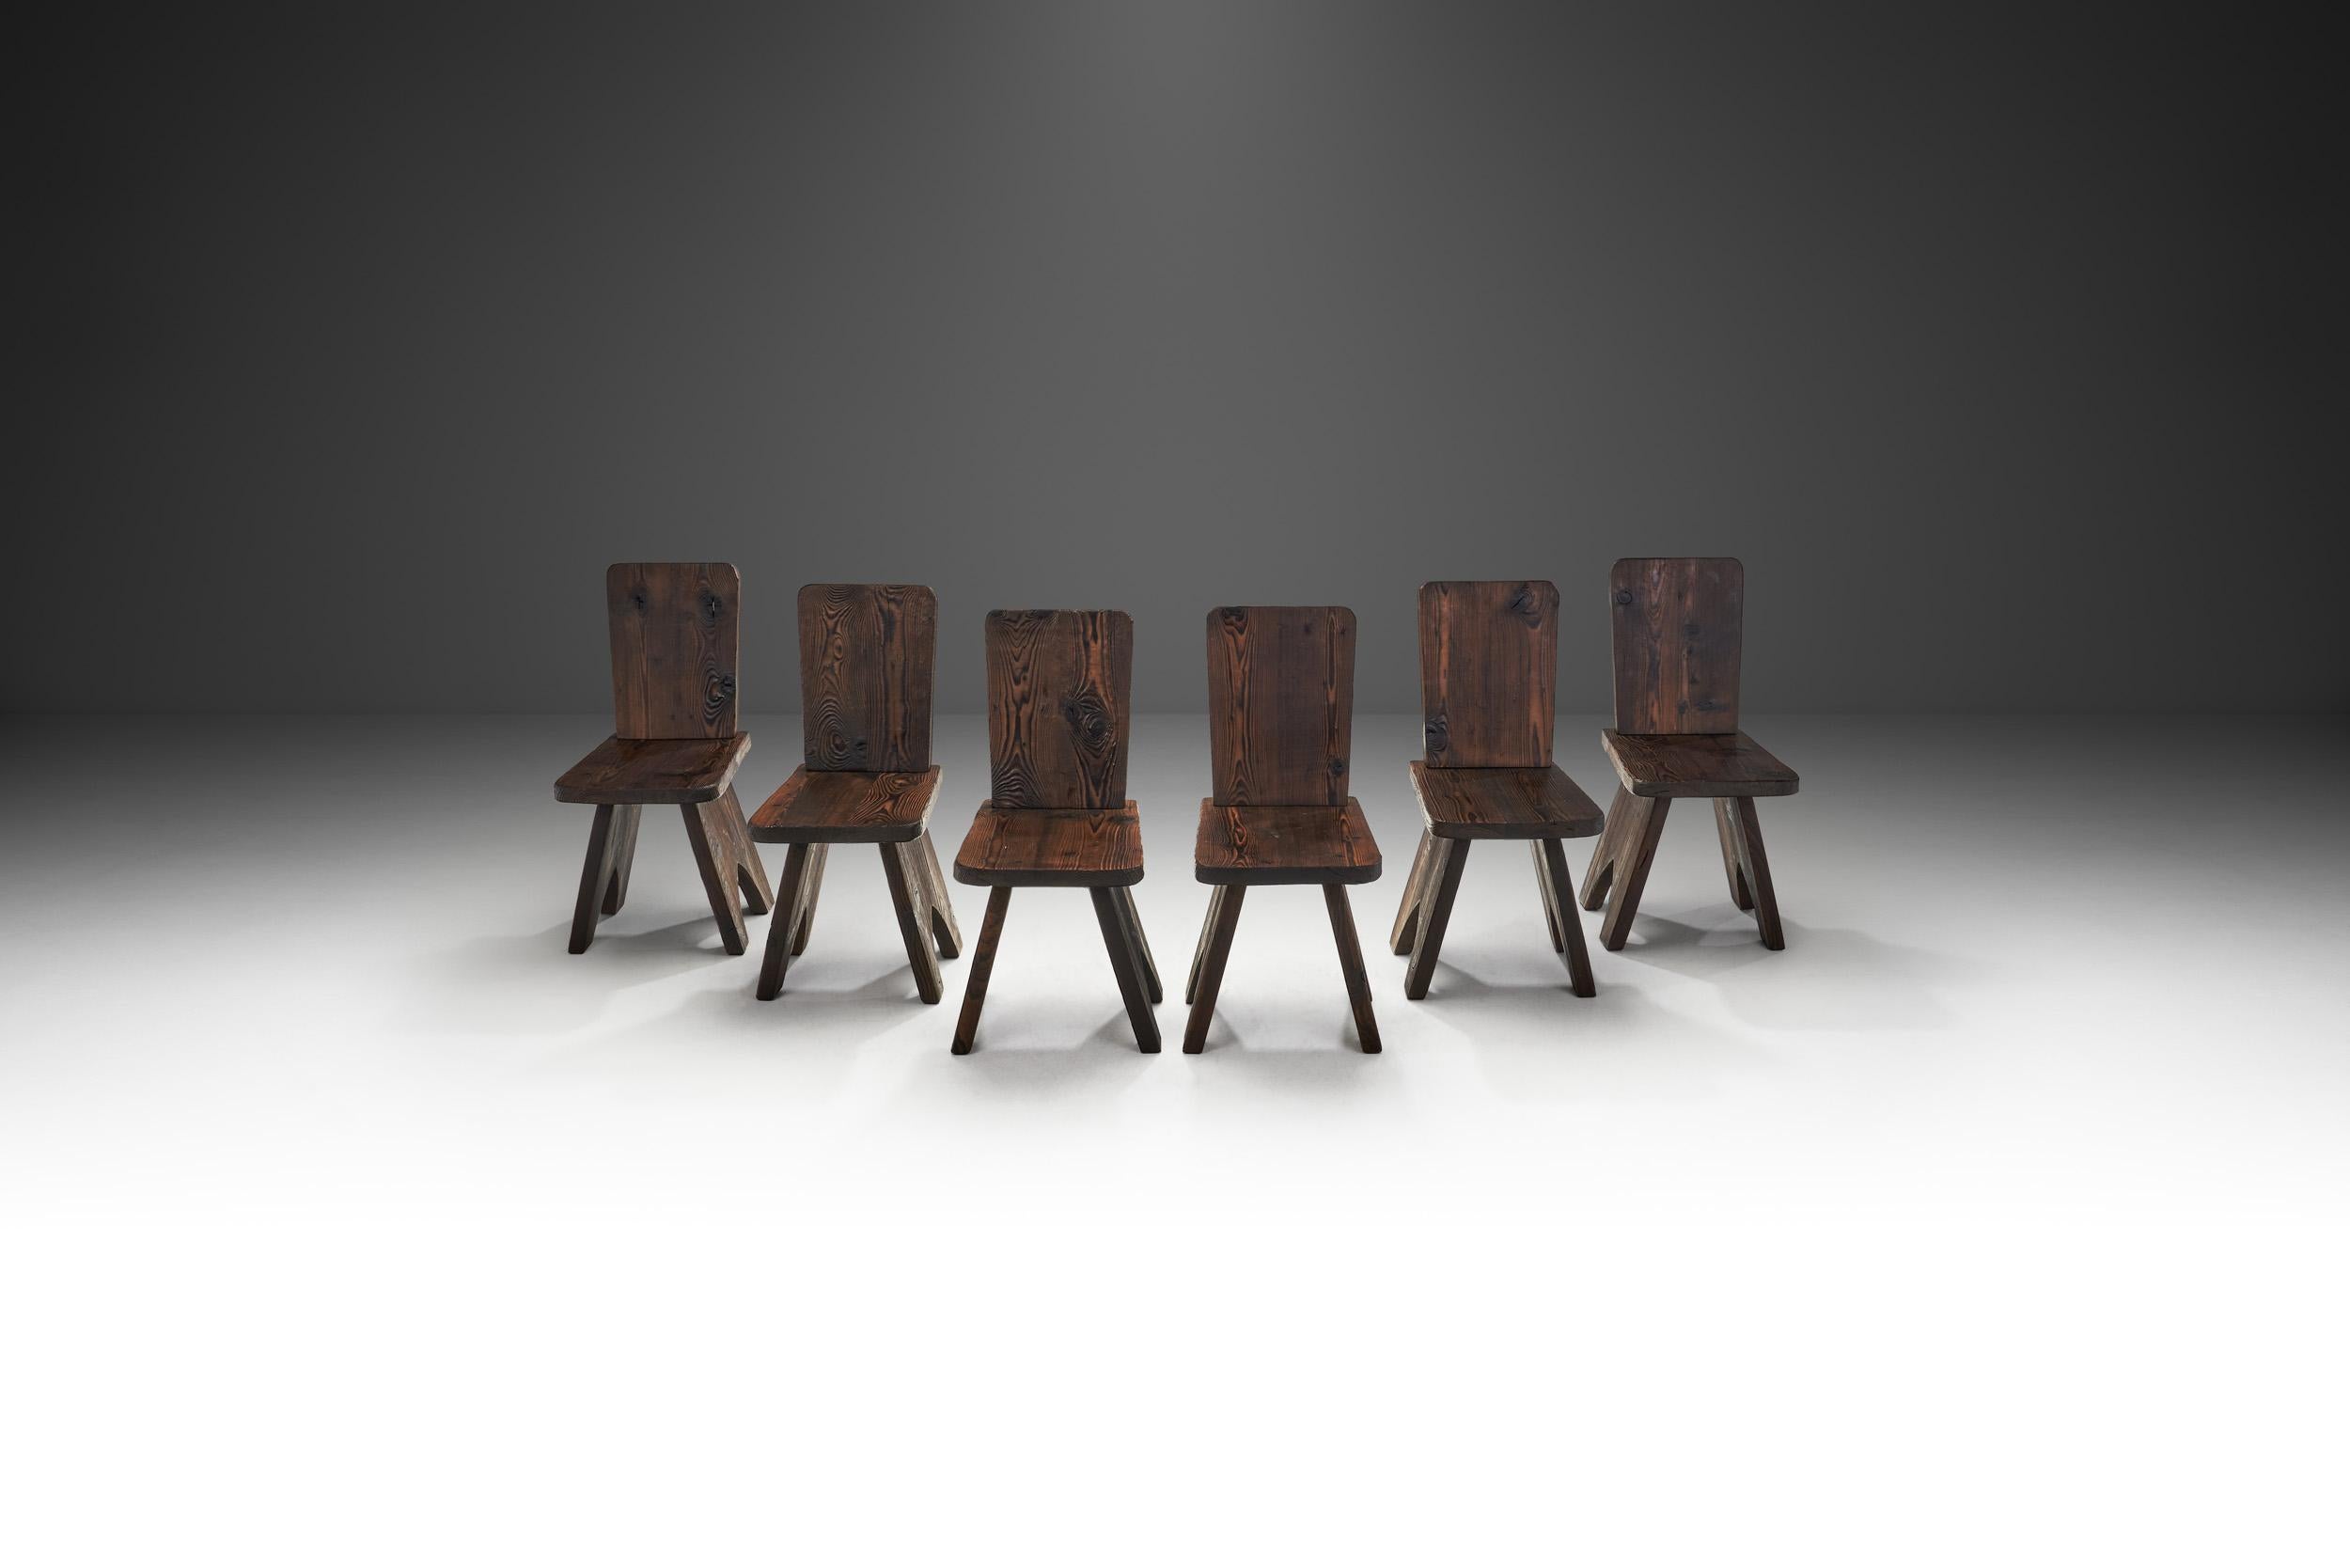 With a robust organic form and an earth-toned palette, this set of six dining chairs is the embodiment of 20th century brutalist design. In furniture and décor, the Brutalist movement was somber, giving importance to eerie organic and rugged shapes